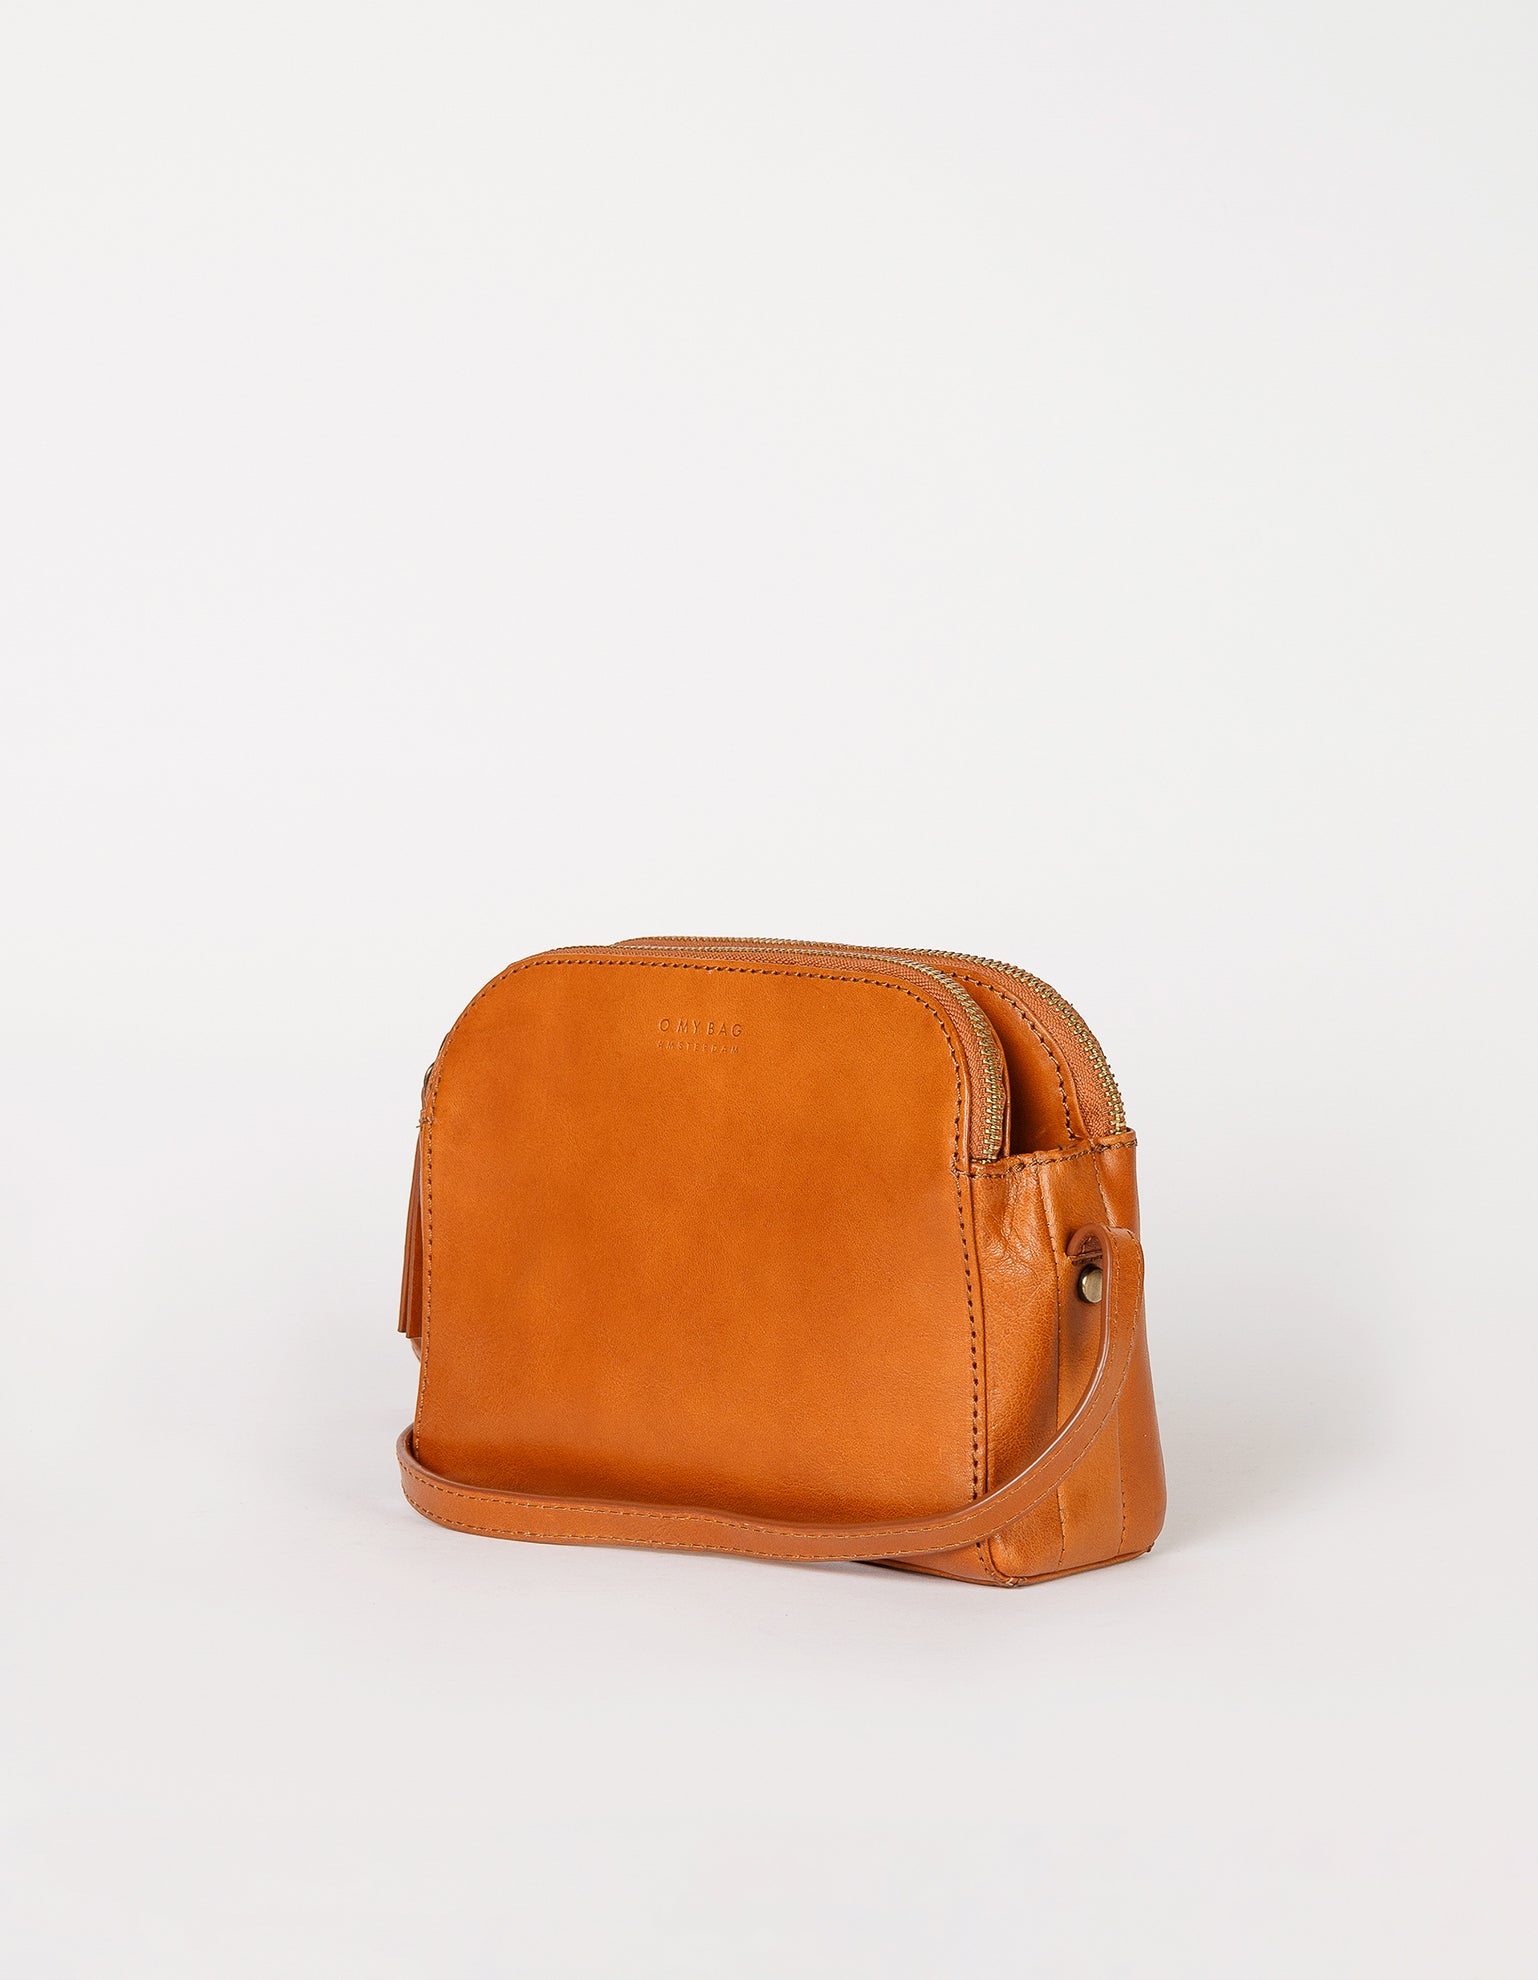 Cognac Leather womens handbag. Square shape with an adjustable strap. Side product image